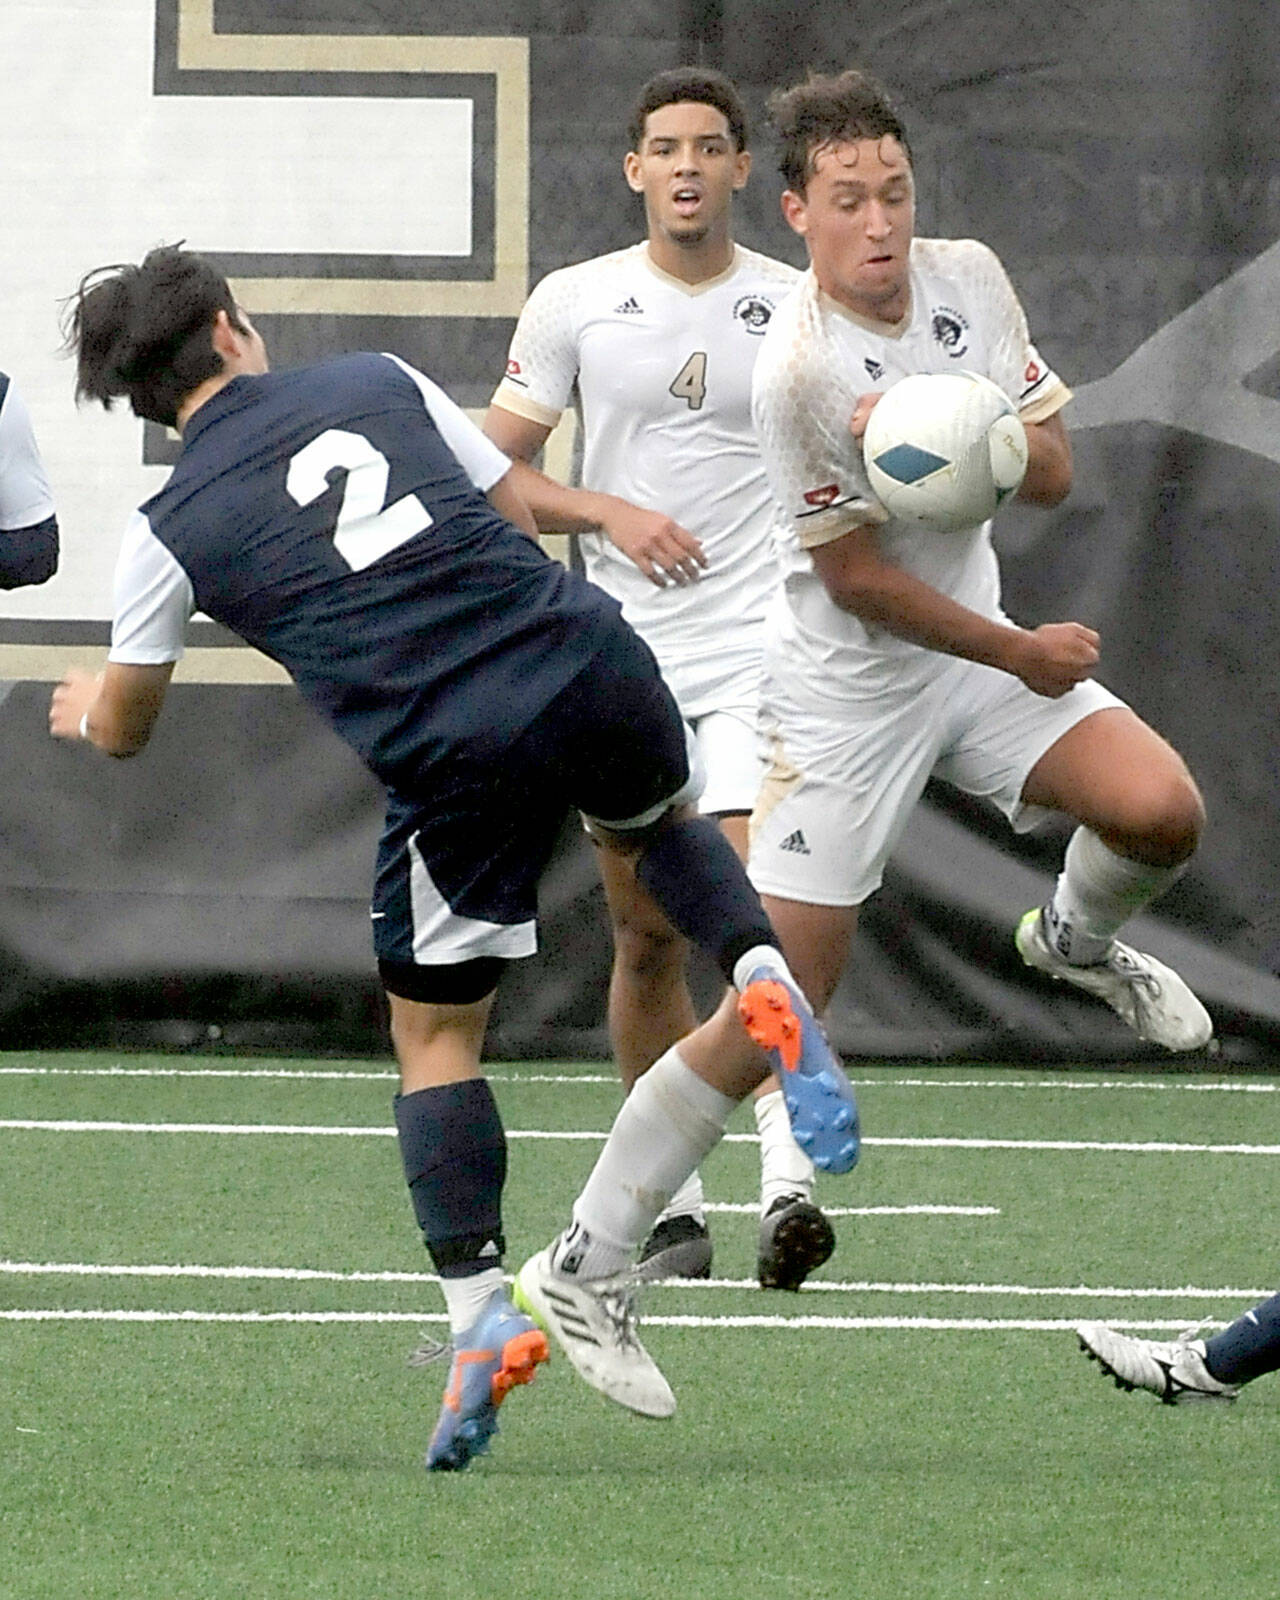 KEITH THORPE/PENINSULA DAILY NEWS Peninsula’s Konrad Muller, right, takes control of the ball from Belluevue’s Yoo Seung-Bum, left, as Peninsula’s Fin Muotune looks on during Saturday’s match at Peninsula College.
KEITH THORPE/PENINSULA DAILY NEWS Peninsula’s Konrad Muller, right, takes control of the ball from Belluevue’s Yoo Seung-Bum, left, as Peninsula’s Fin Muotune looks on during Saturday’s match at Peninsula College.